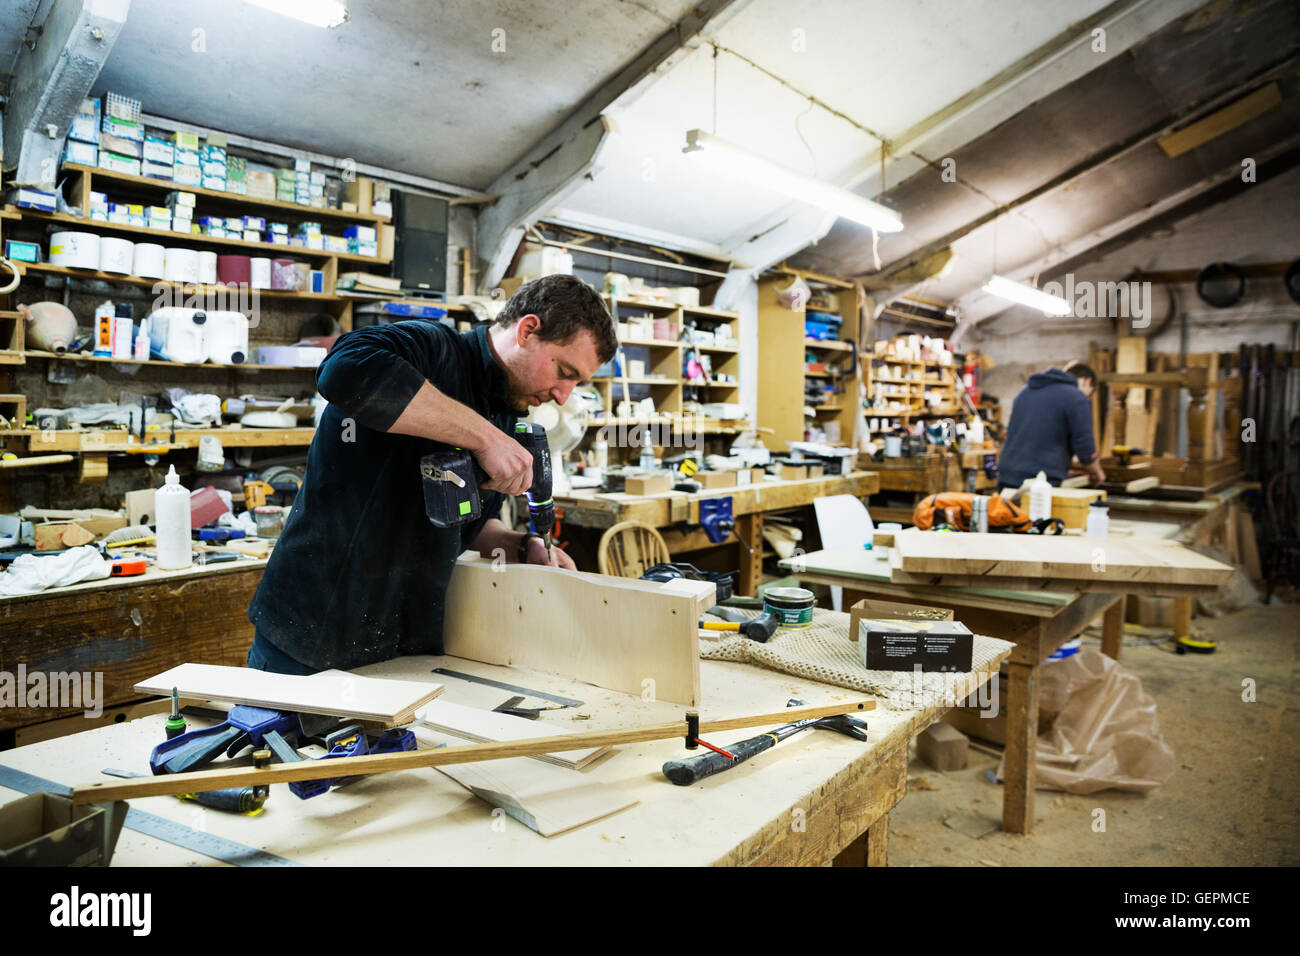 Man standing at a work bench in a carpentry workshop, working on a piece of wood, using a drill. Stock Photo